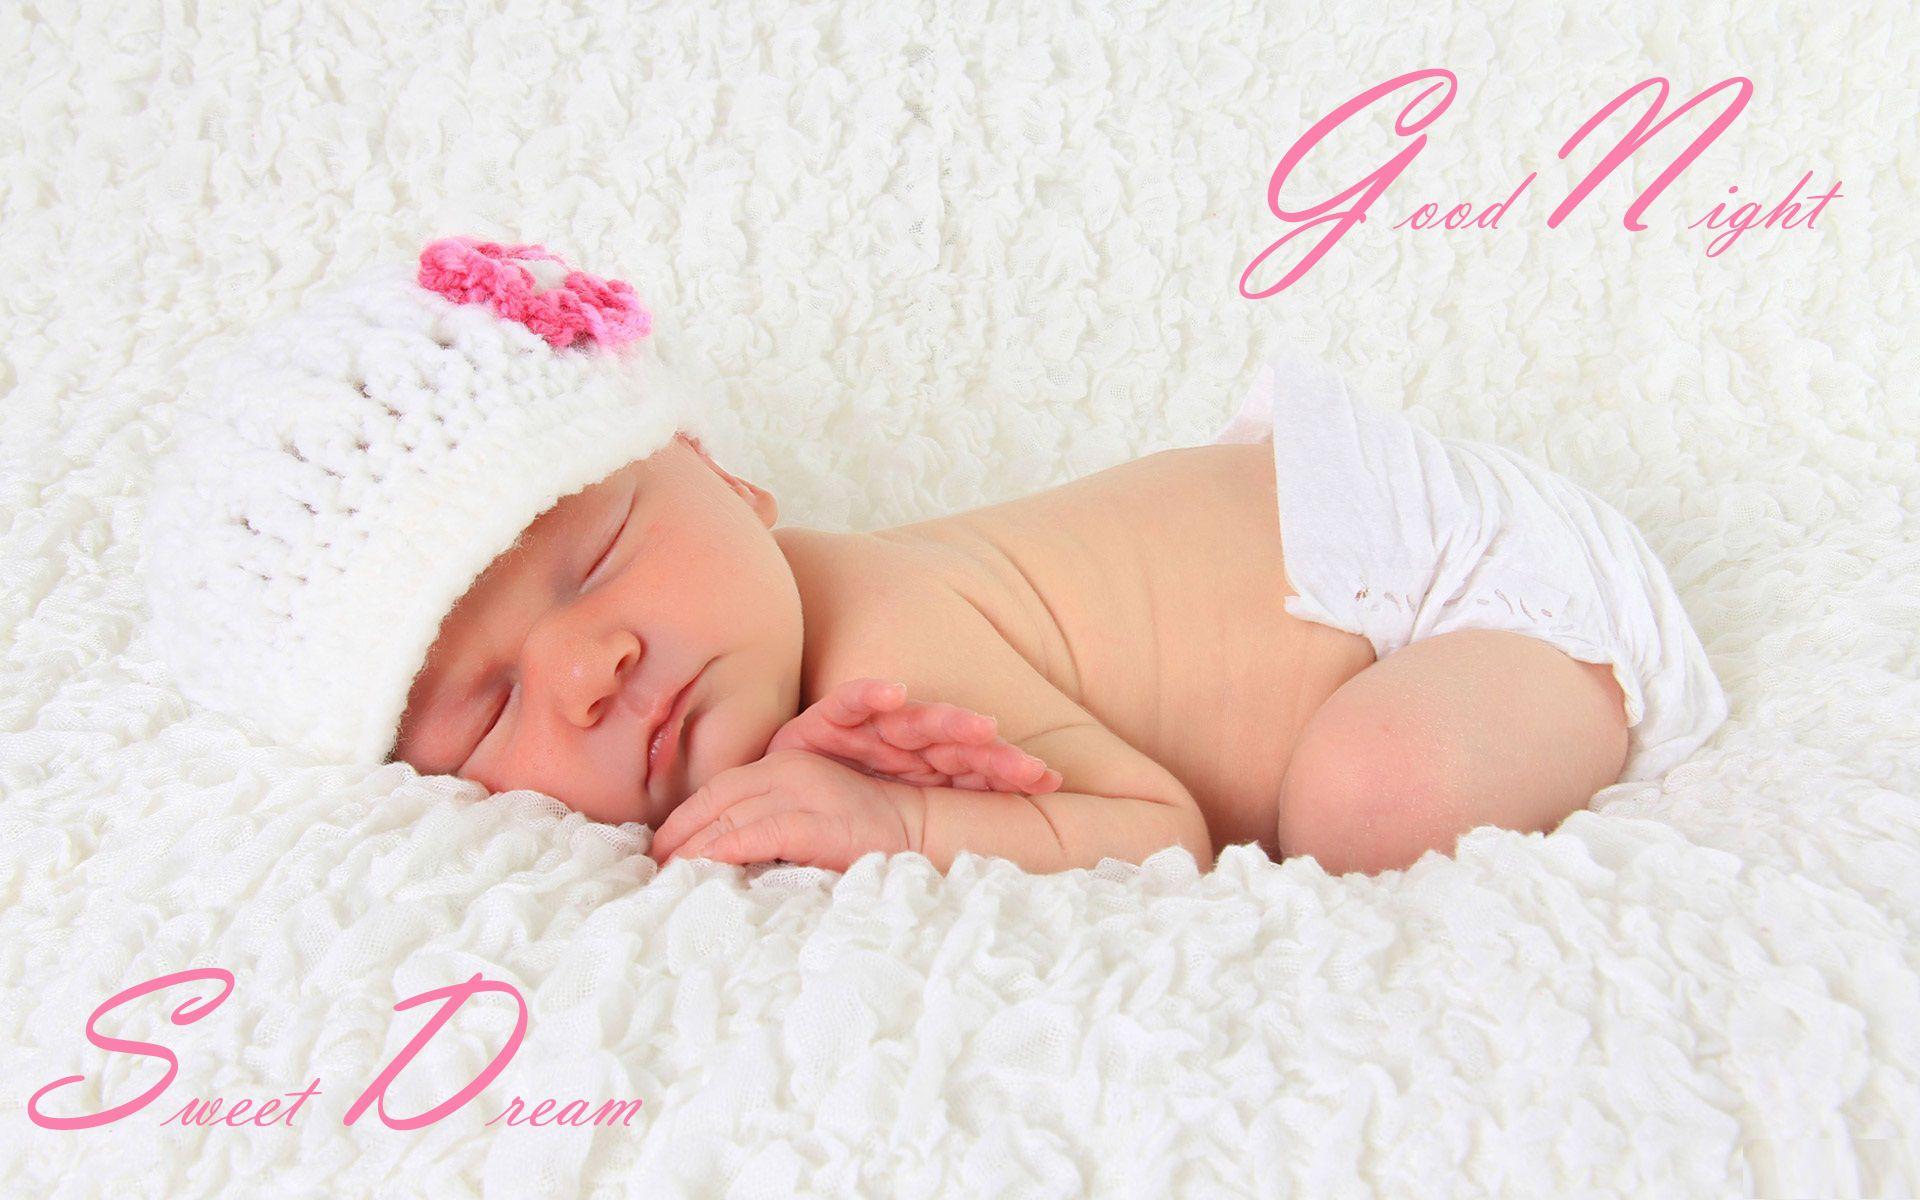 Wallpaper HD Of Good Night Wishes Baby The Photo Club Pics